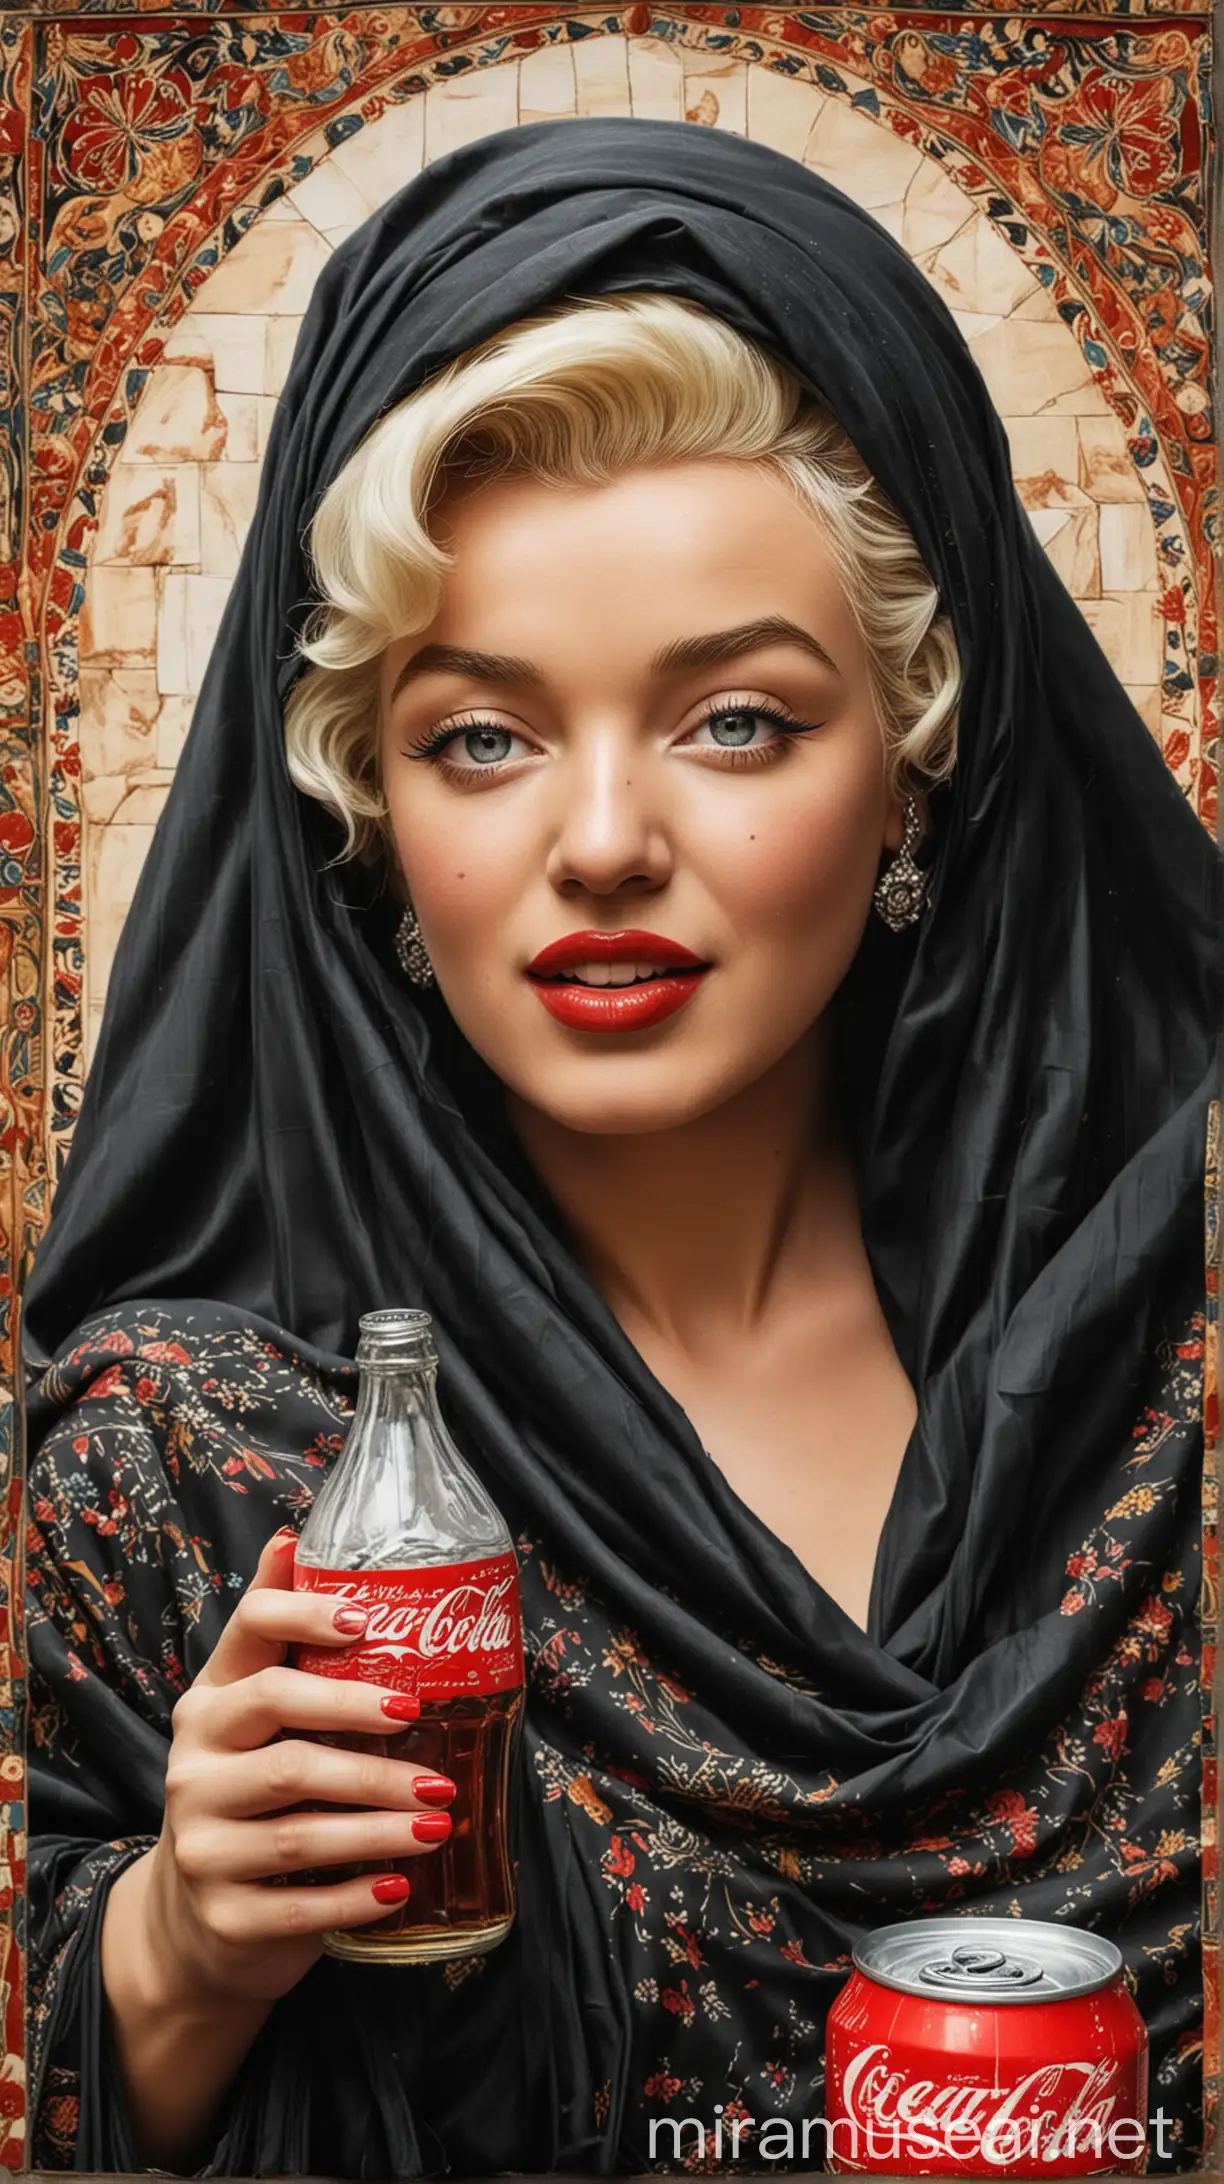 I want you to design a photo of Marilyn Monroe with a black chador of Iranian women, only her face and a little of her hair come out of the tent, her right hand is out of the lower part of the tent and the drink of Coca-Cola is in her hand, the back of the Marlin is made of old traditional Iranian tiles.